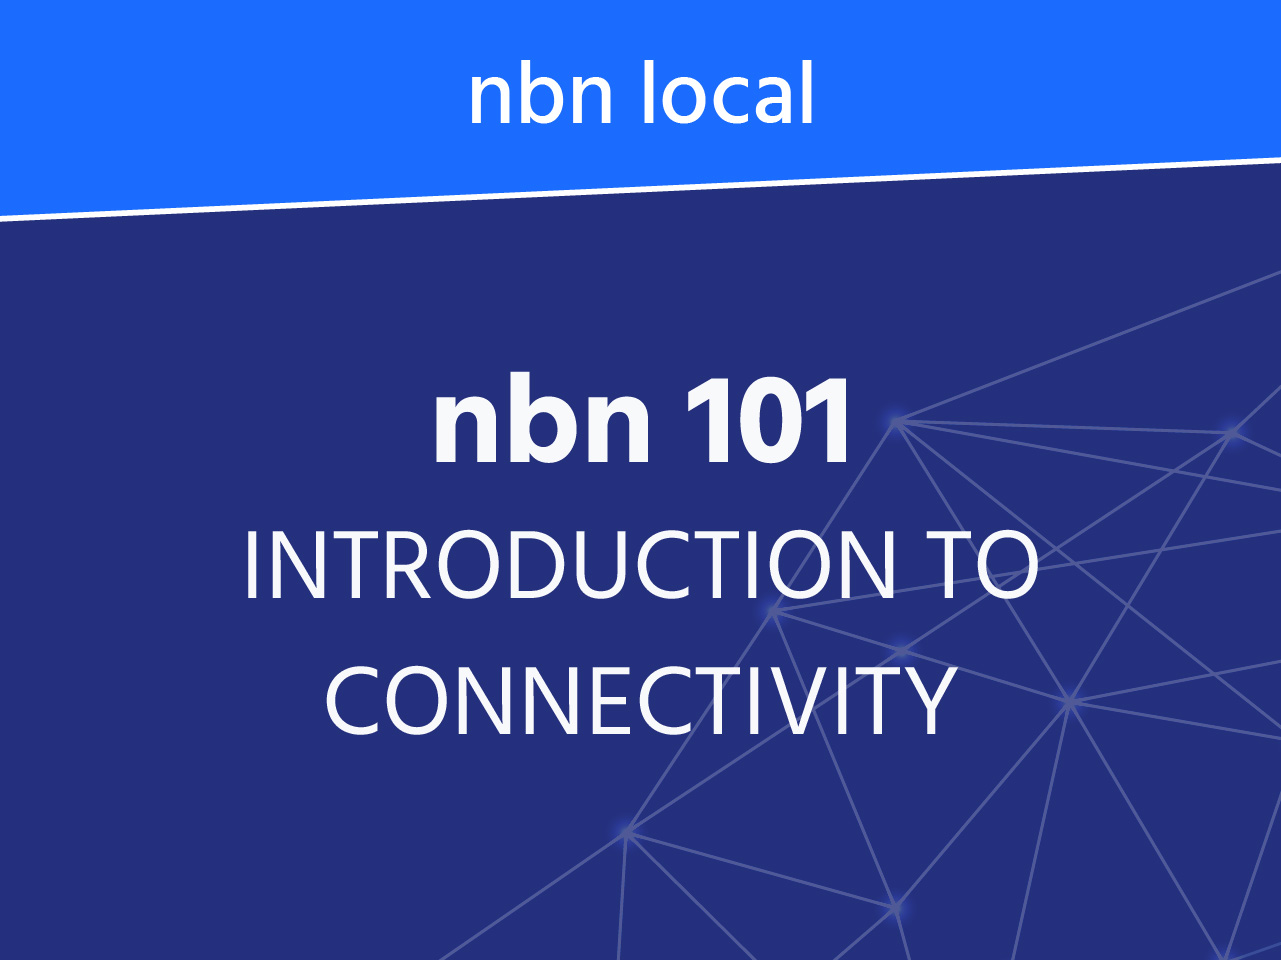 nbn 101, Introduction to connectivity